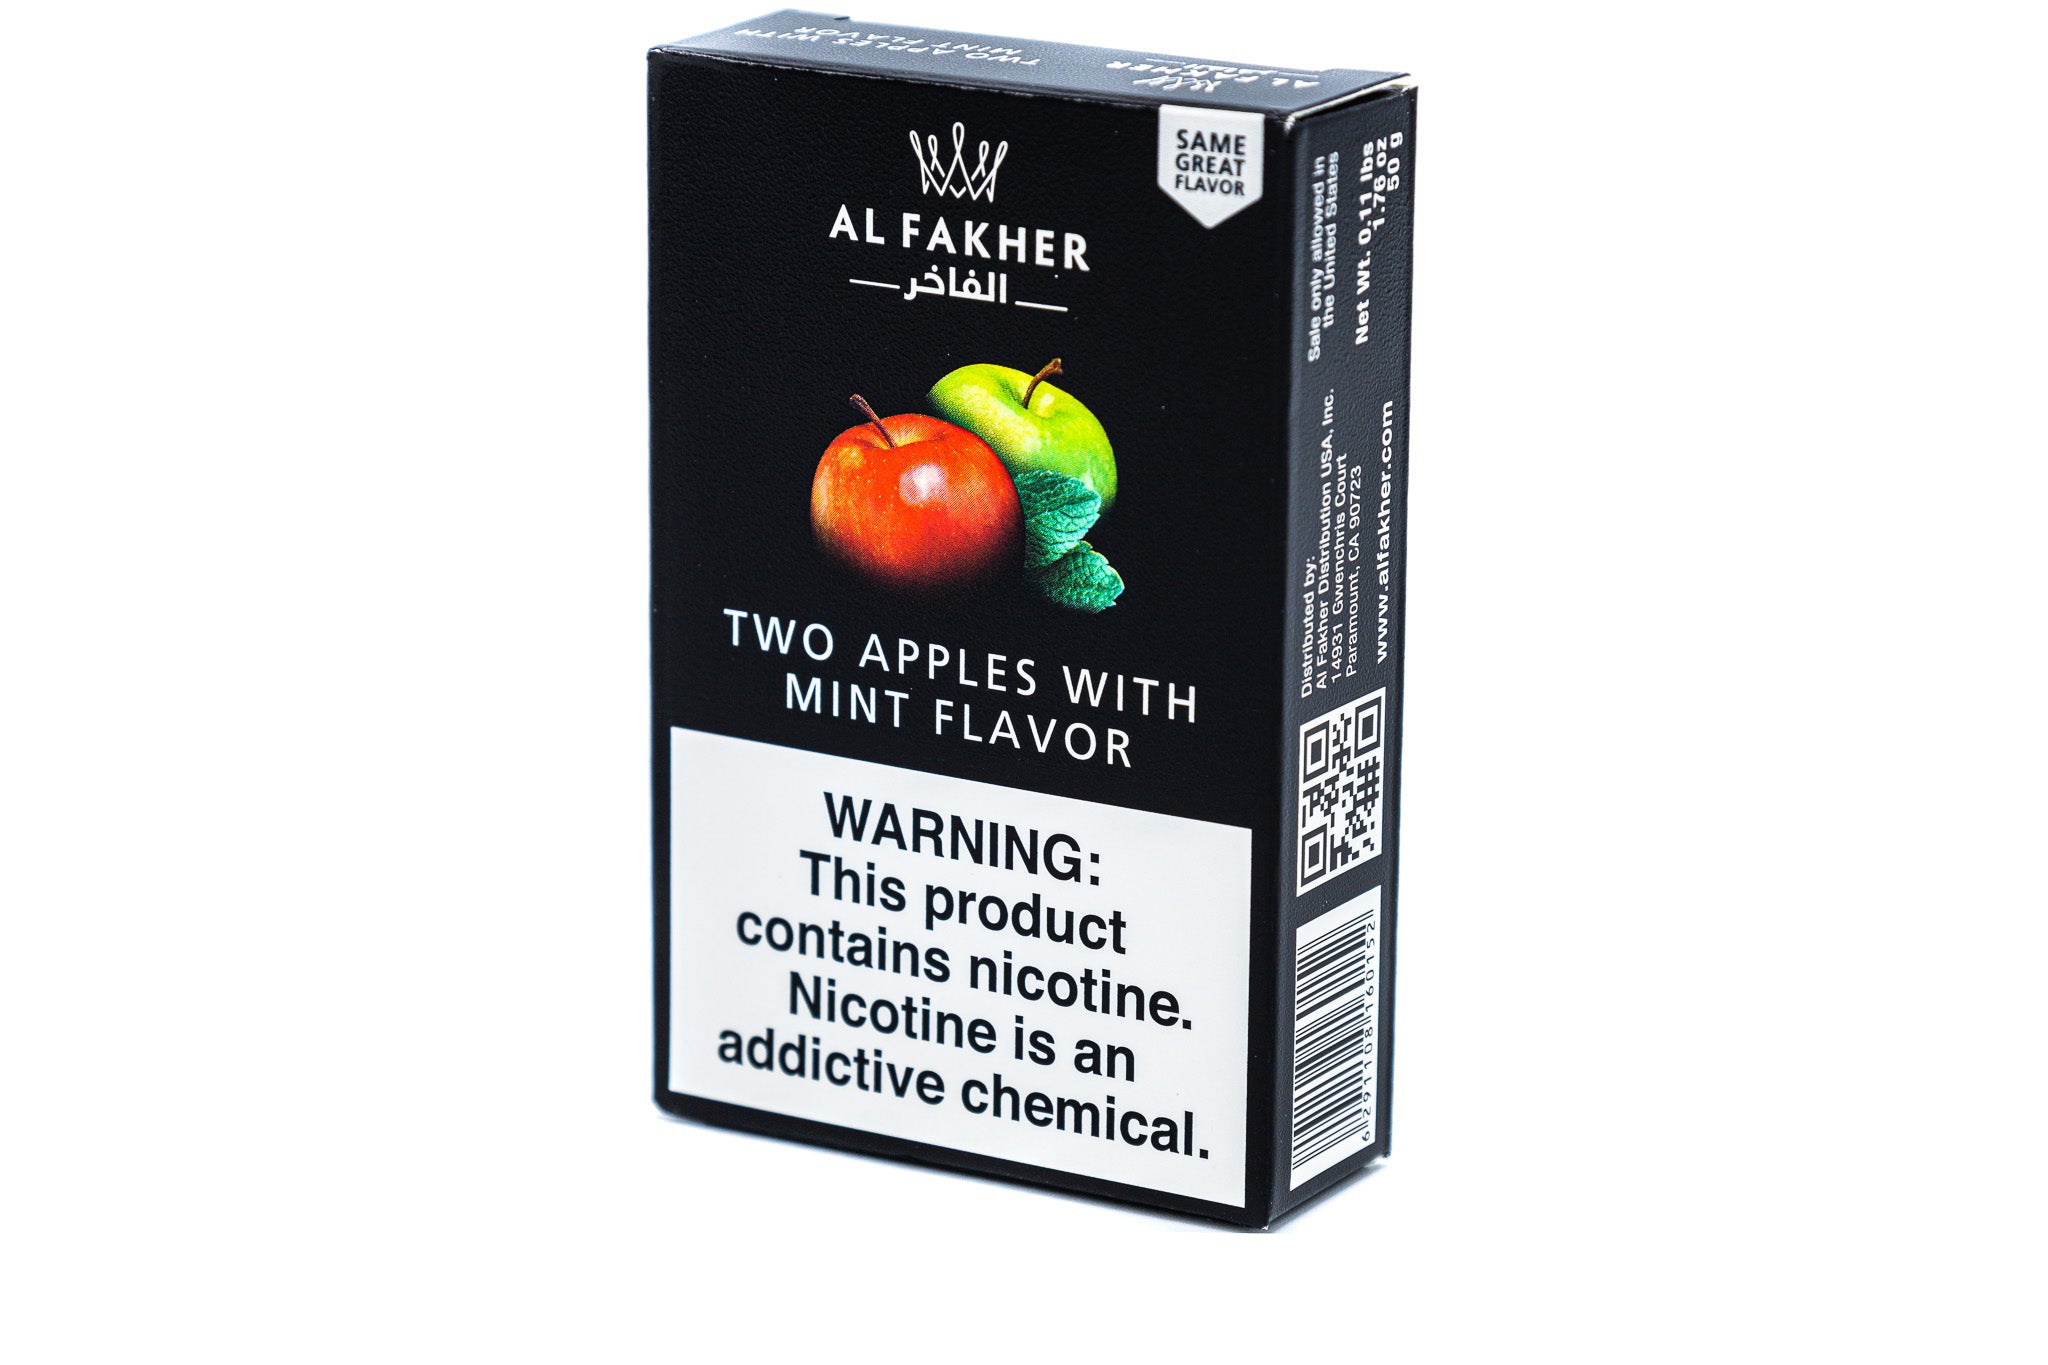 Al Fakher Two Apples with Mint